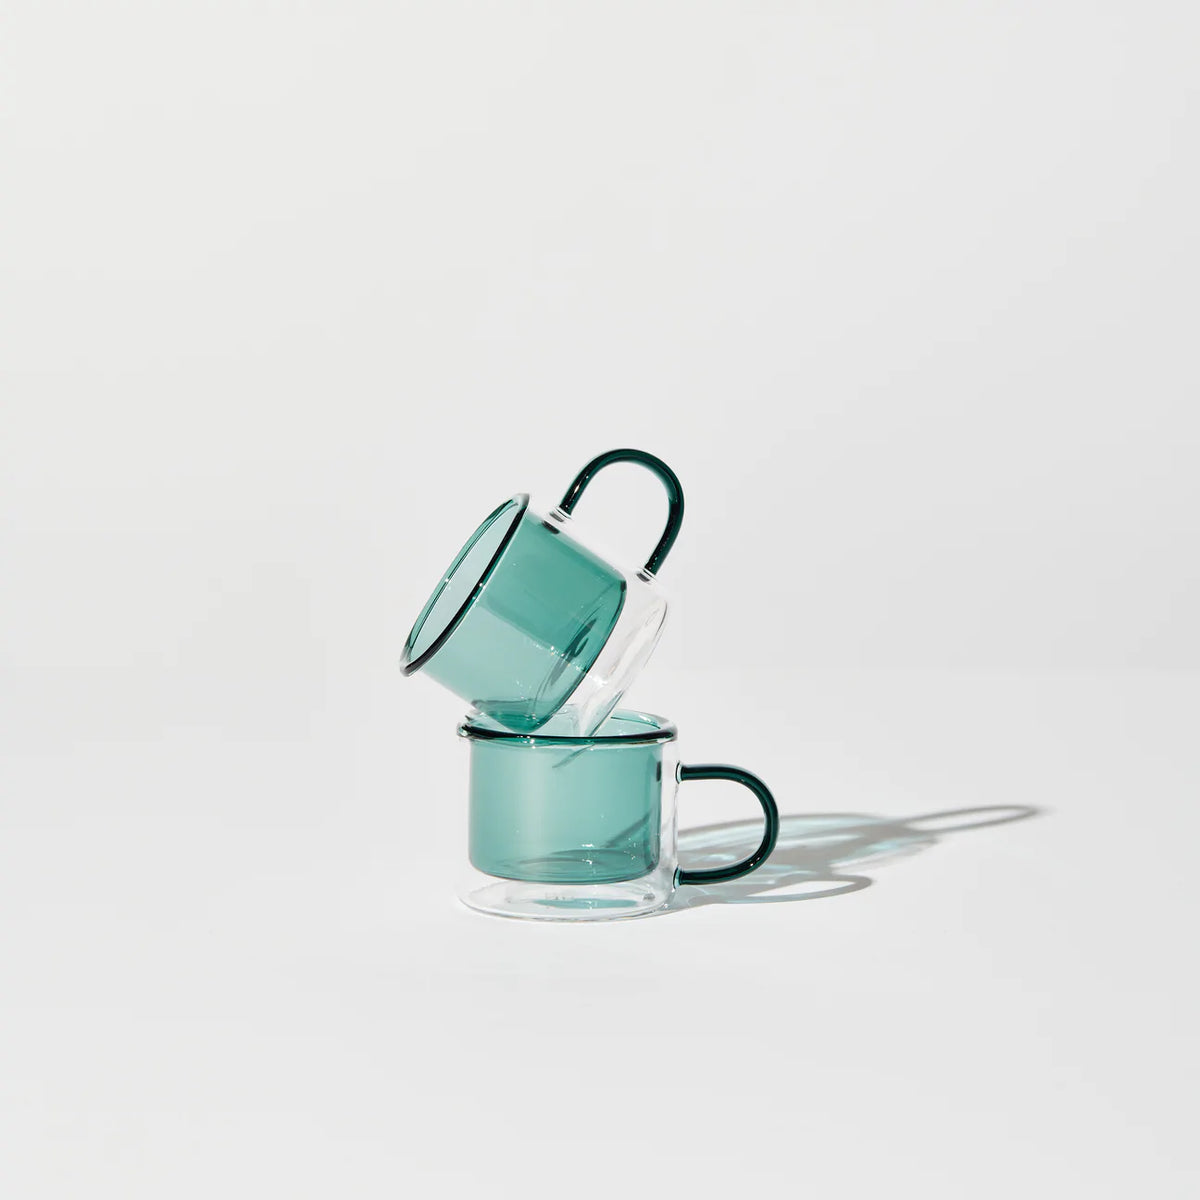 https://www.jumbledonline.shop/wp-content/uploads/1690/40/discover-the-power-of-innovation-shorty-espresso-cup-set-teal-house-of-nunu_0.webp